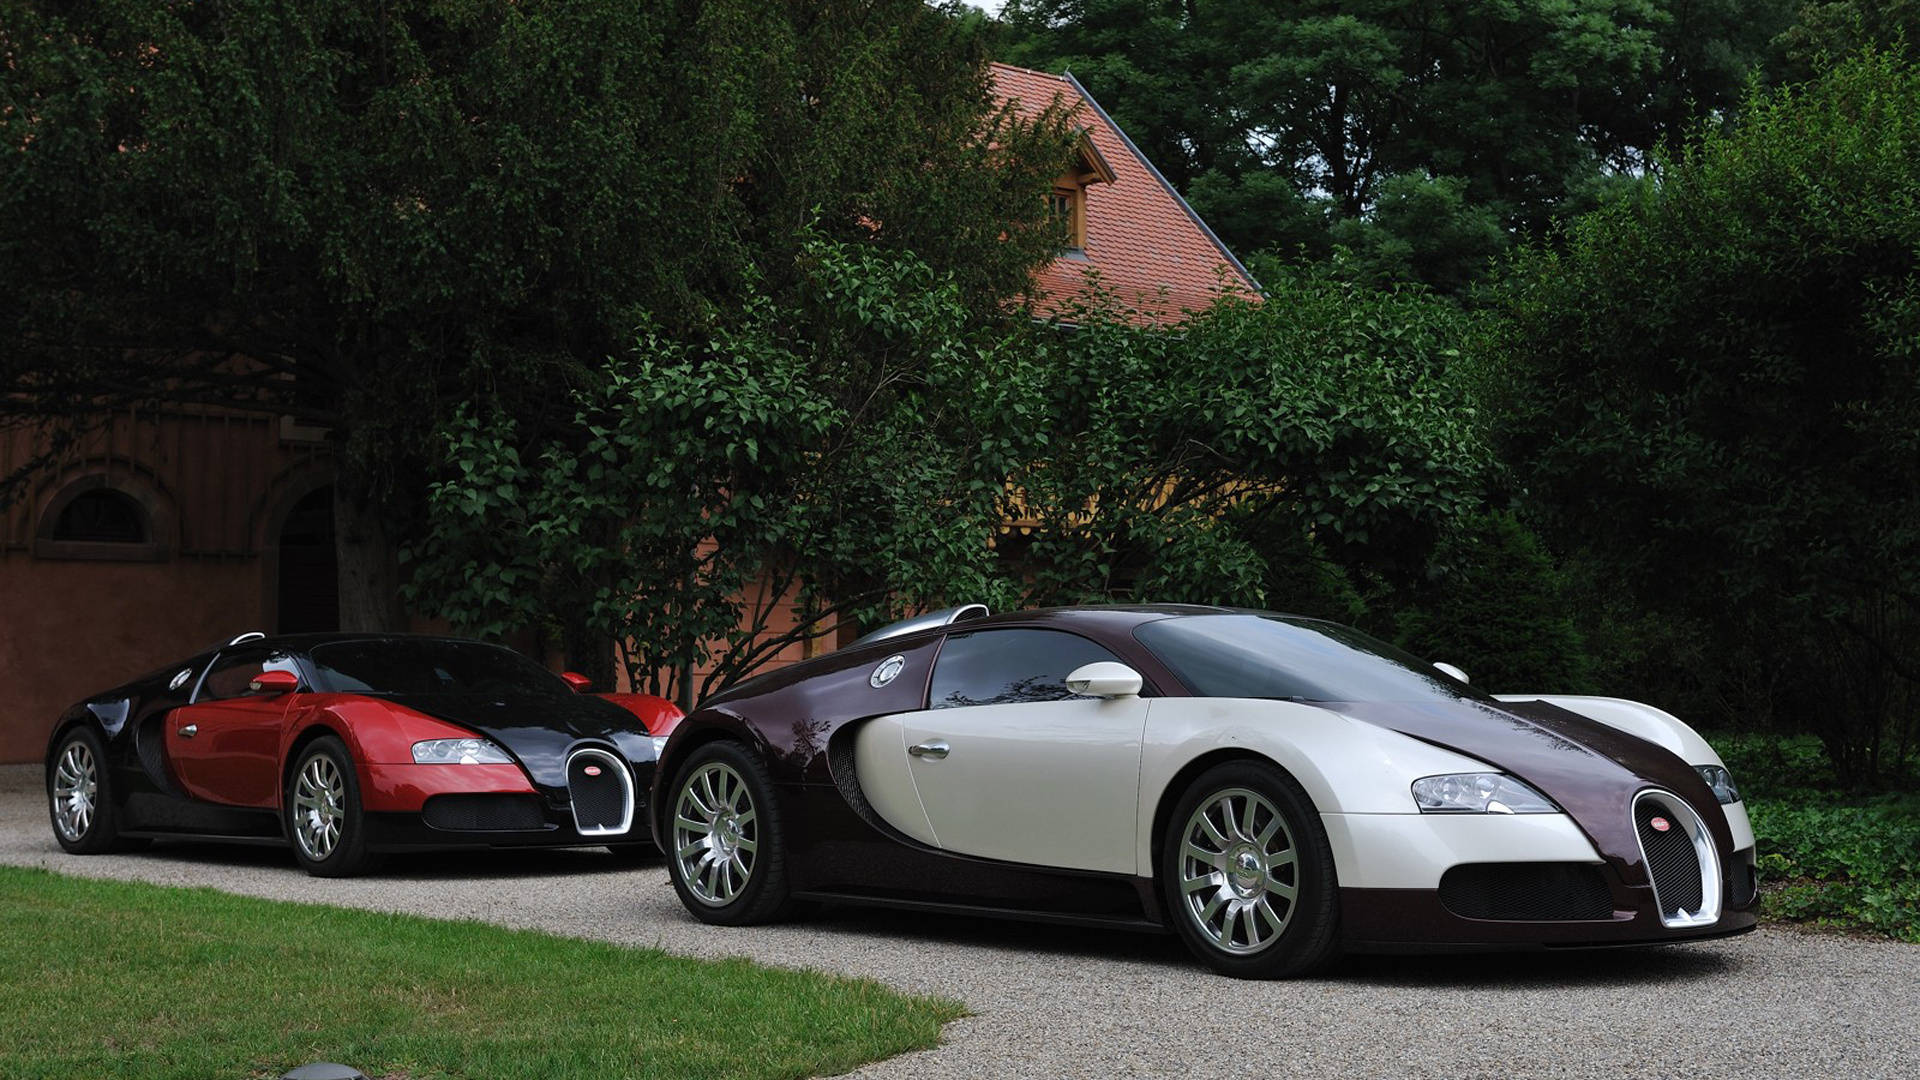 Two Cool Bugatti Cars Parked Wallpaper